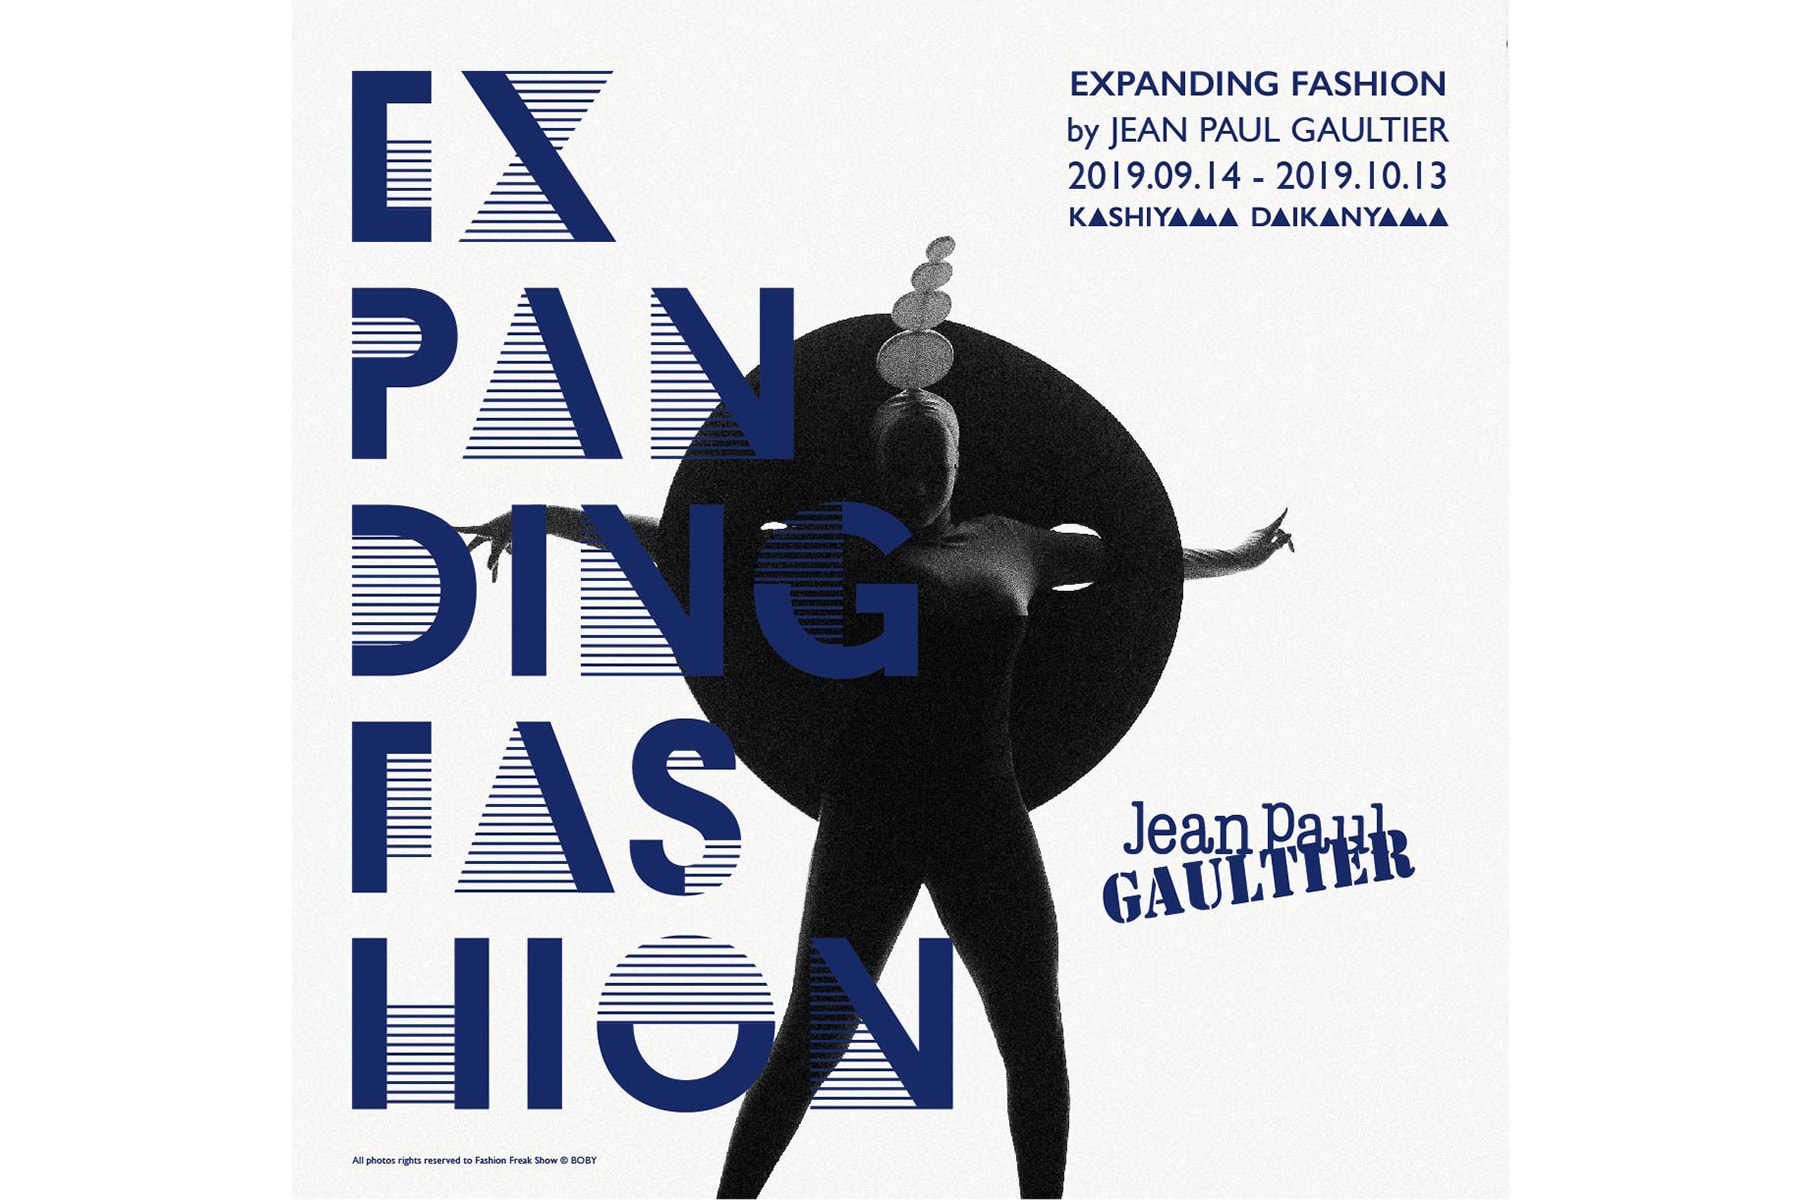  multi concept building art fashion foods kashiyama daikanyama holds special exhibition titled ジャンポール・ゴルチエ EXPANDING FASHION by JEAN PAUL GAULTIER designer enfant terrible 悪童 fashion archives haute couture 1970s 2000s 1990s ファッション アバンギャルド 特別企画展 東京 代官山 開催 決定